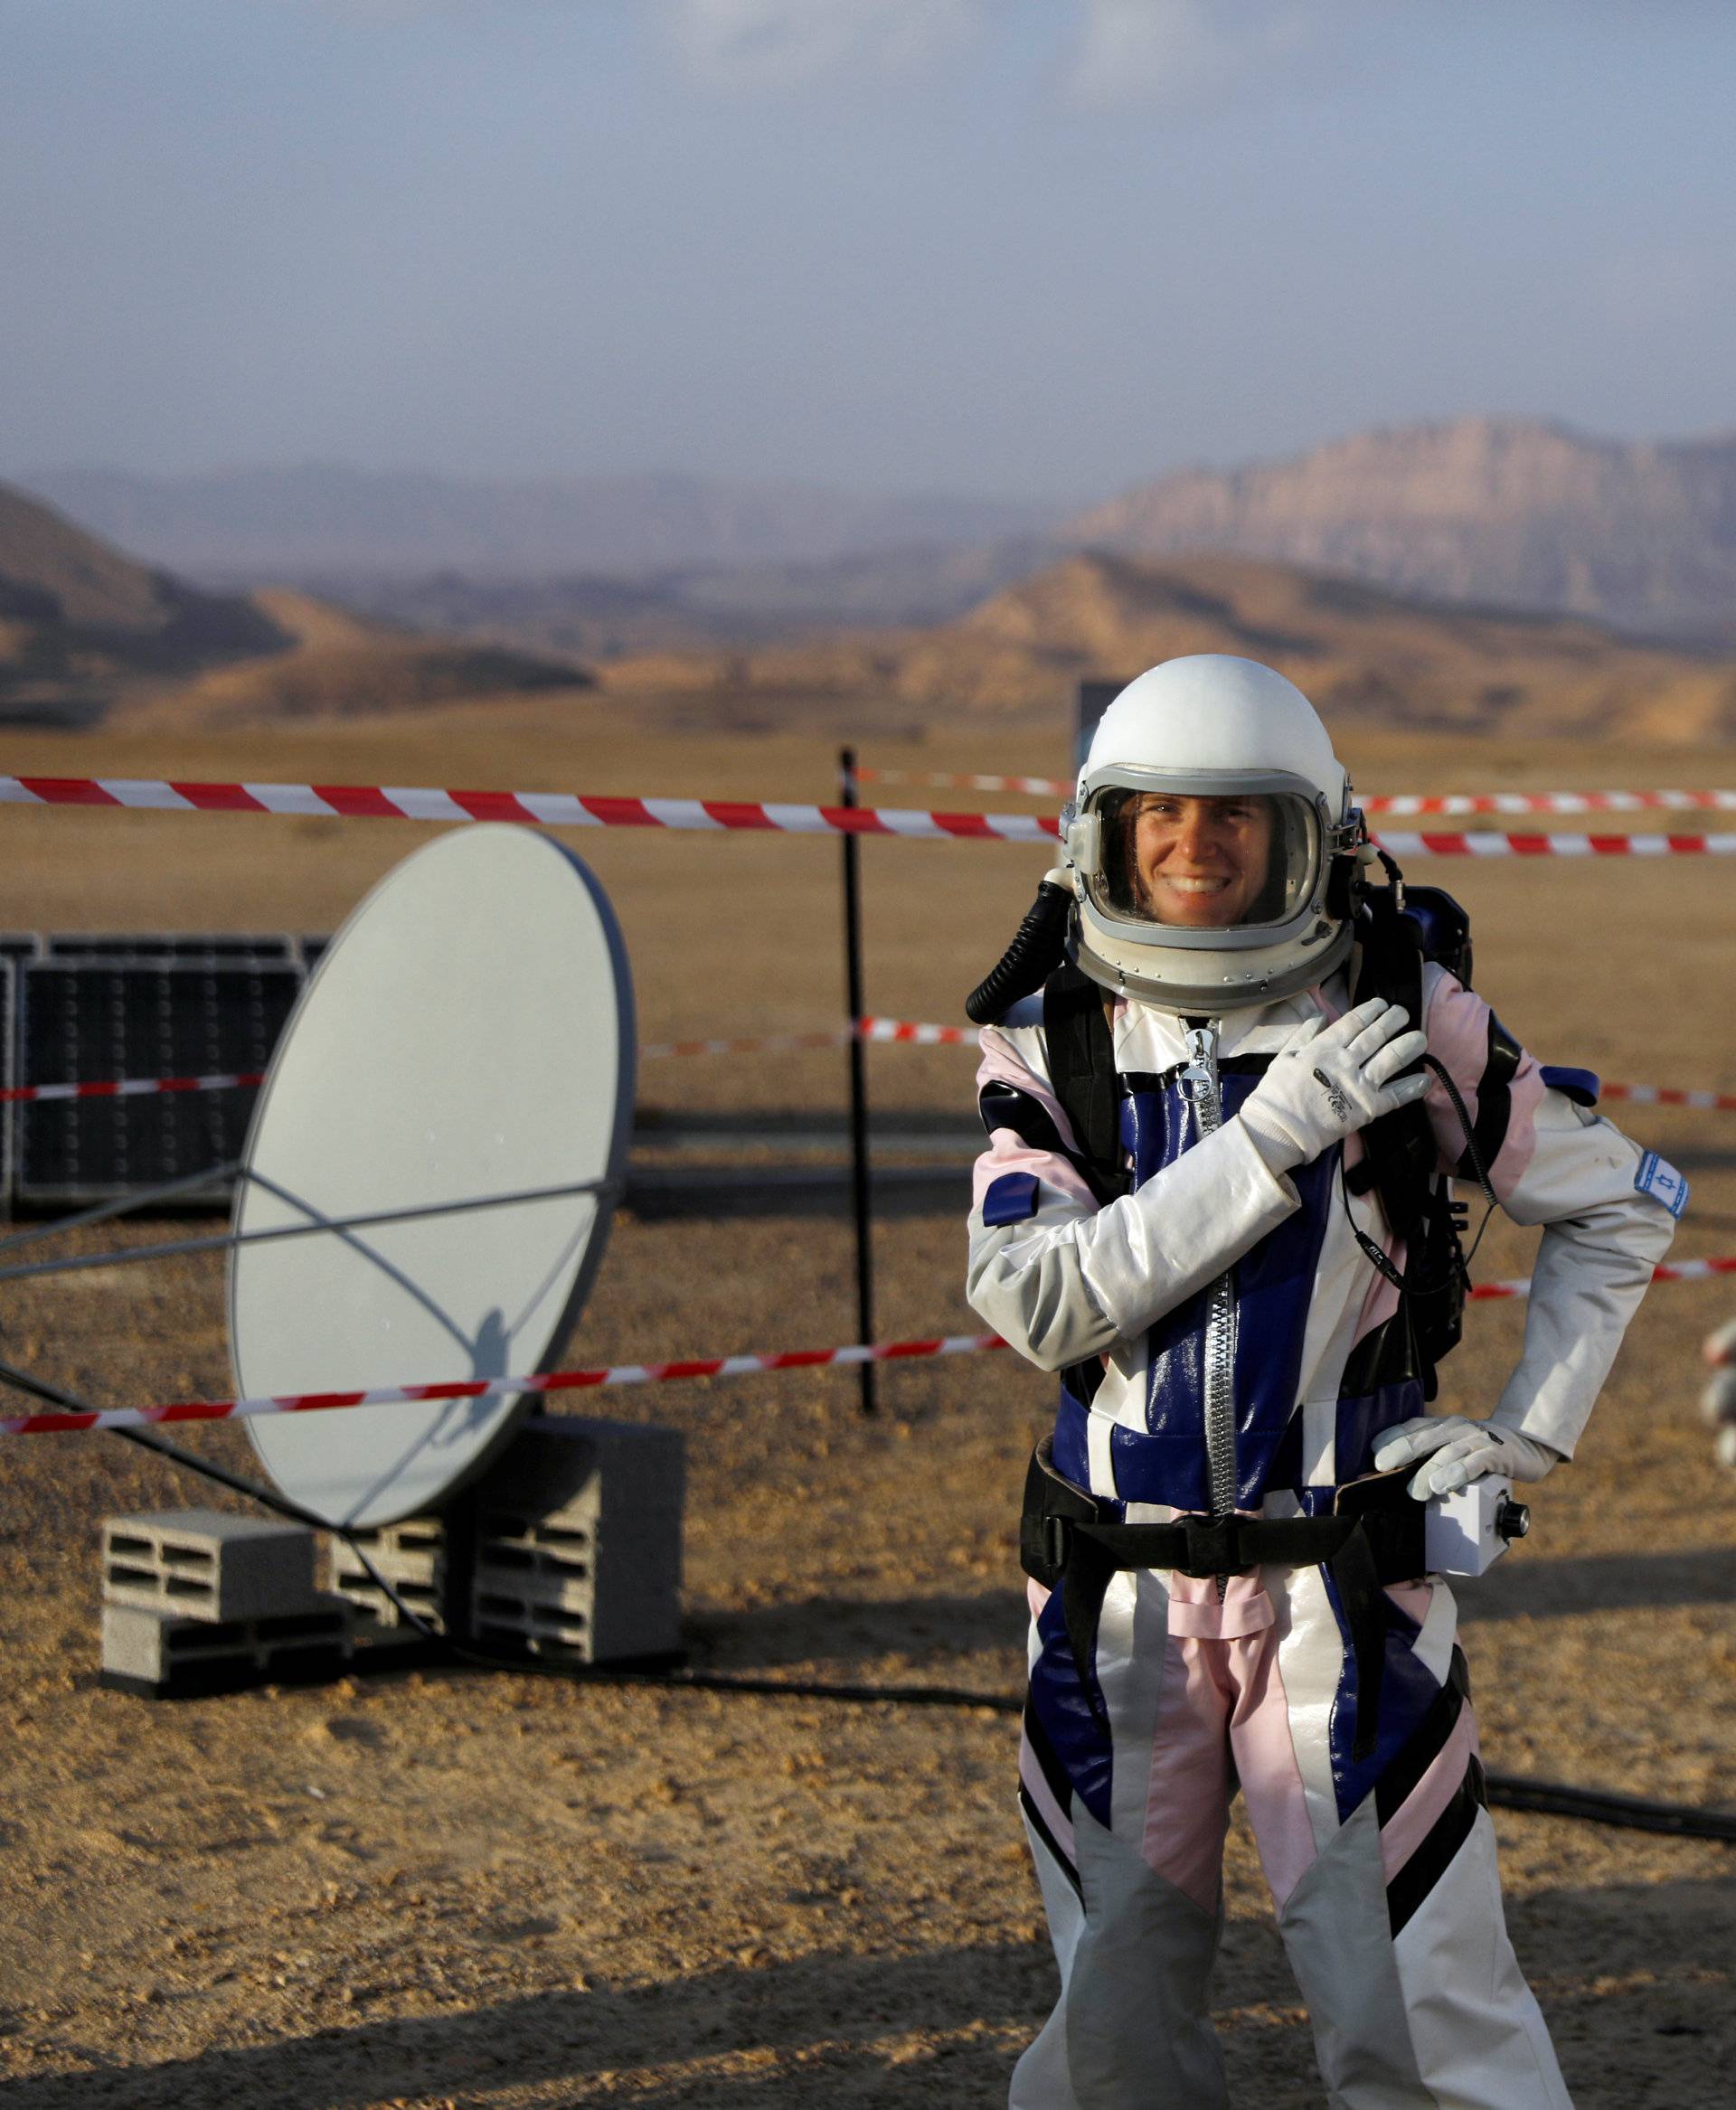 Israeli scientists participate in an experiment simulating a mission to Mars, at the D-MARS Desert Mars Analog Ramon Station project of Israel's Space Agency, Ministry of Science, near Mitzpe Ramon